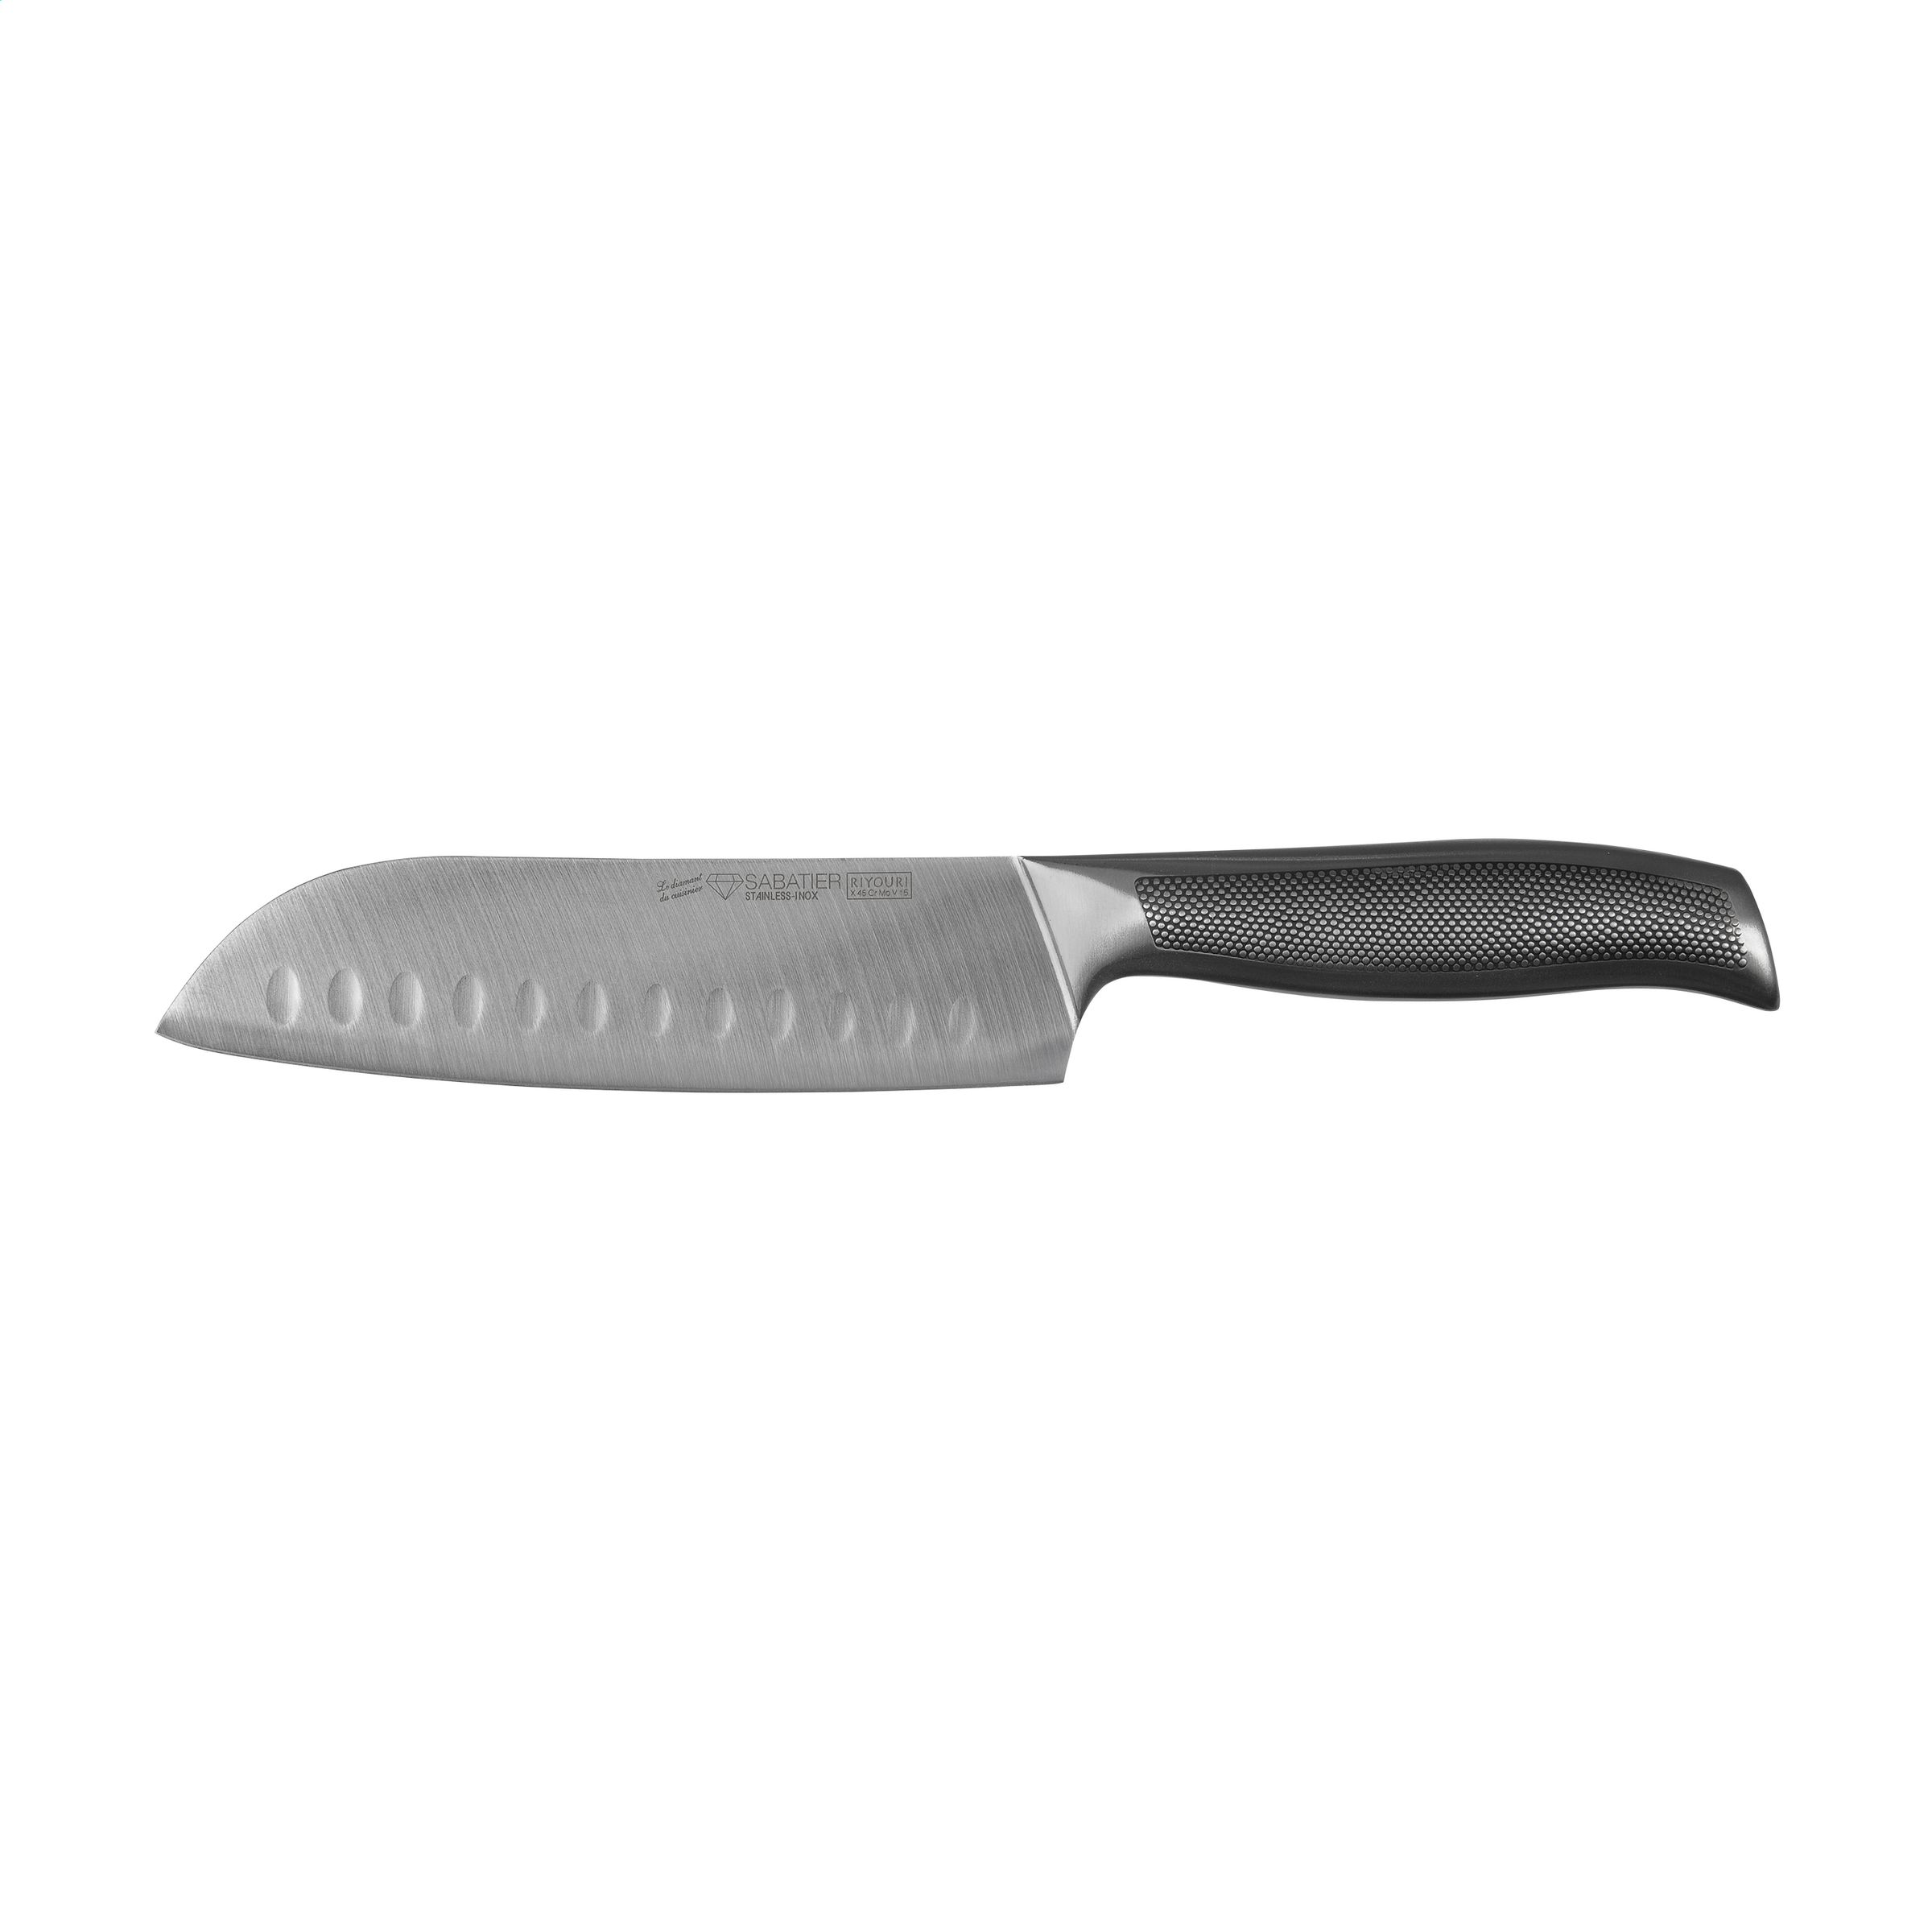 An all-purpose Asian knife with a 17 cm wide blade - Little Snoring - Yardley Wood